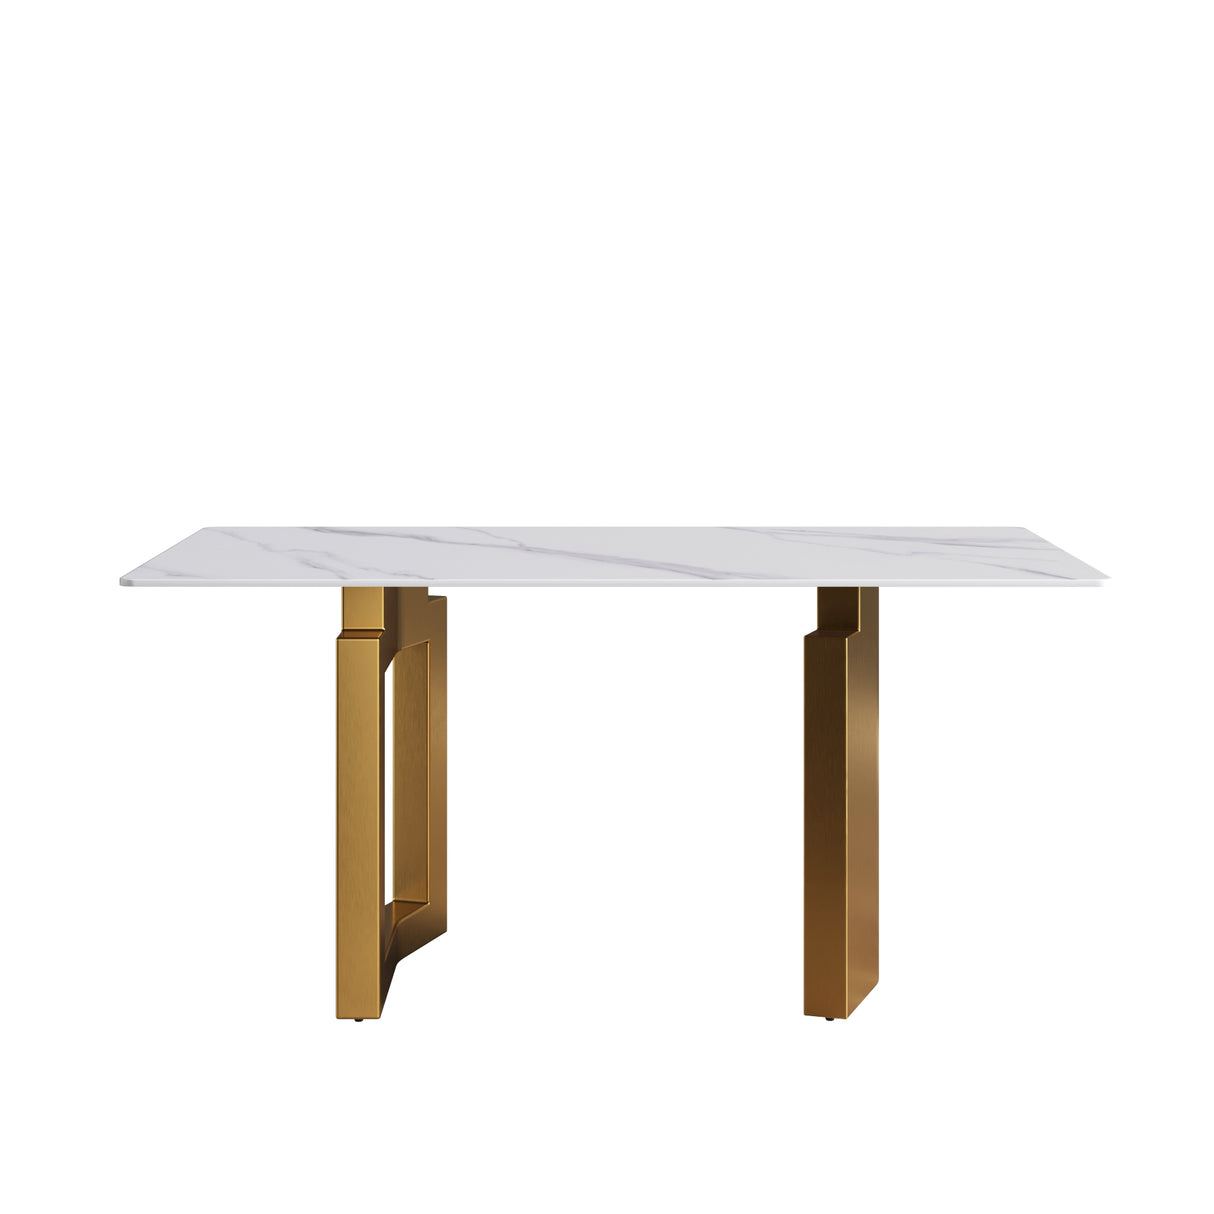 63"Modern artificial stone white straight edge golden metal leg dining table -6 people - Home Elegance USA